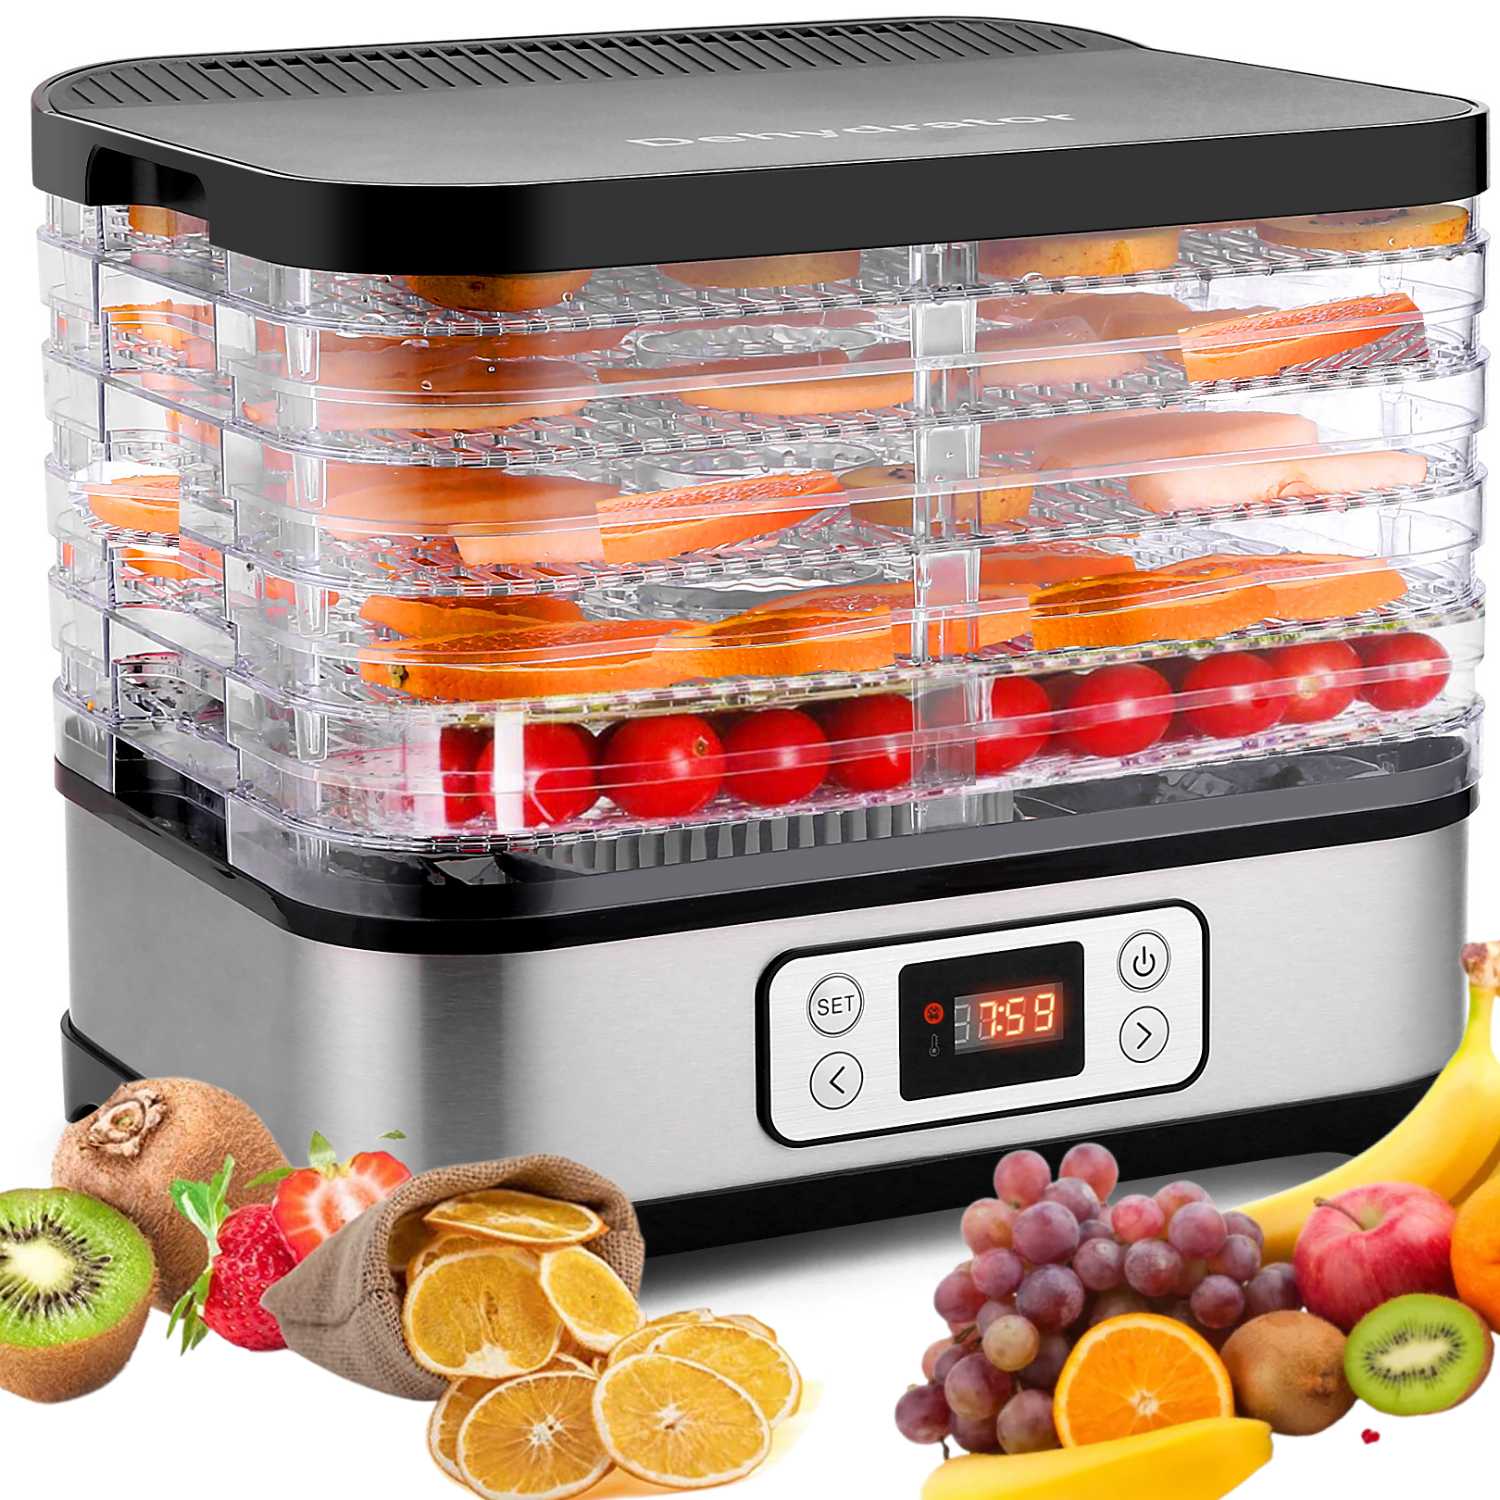 IAGREEA Food Dehydrator Machine, 8 Trays, Food Dehydrator, Digital Timer  And Temperature Control, For Jerky/Meat/Beef/Fruit/Vegetable, Dog Treats, He